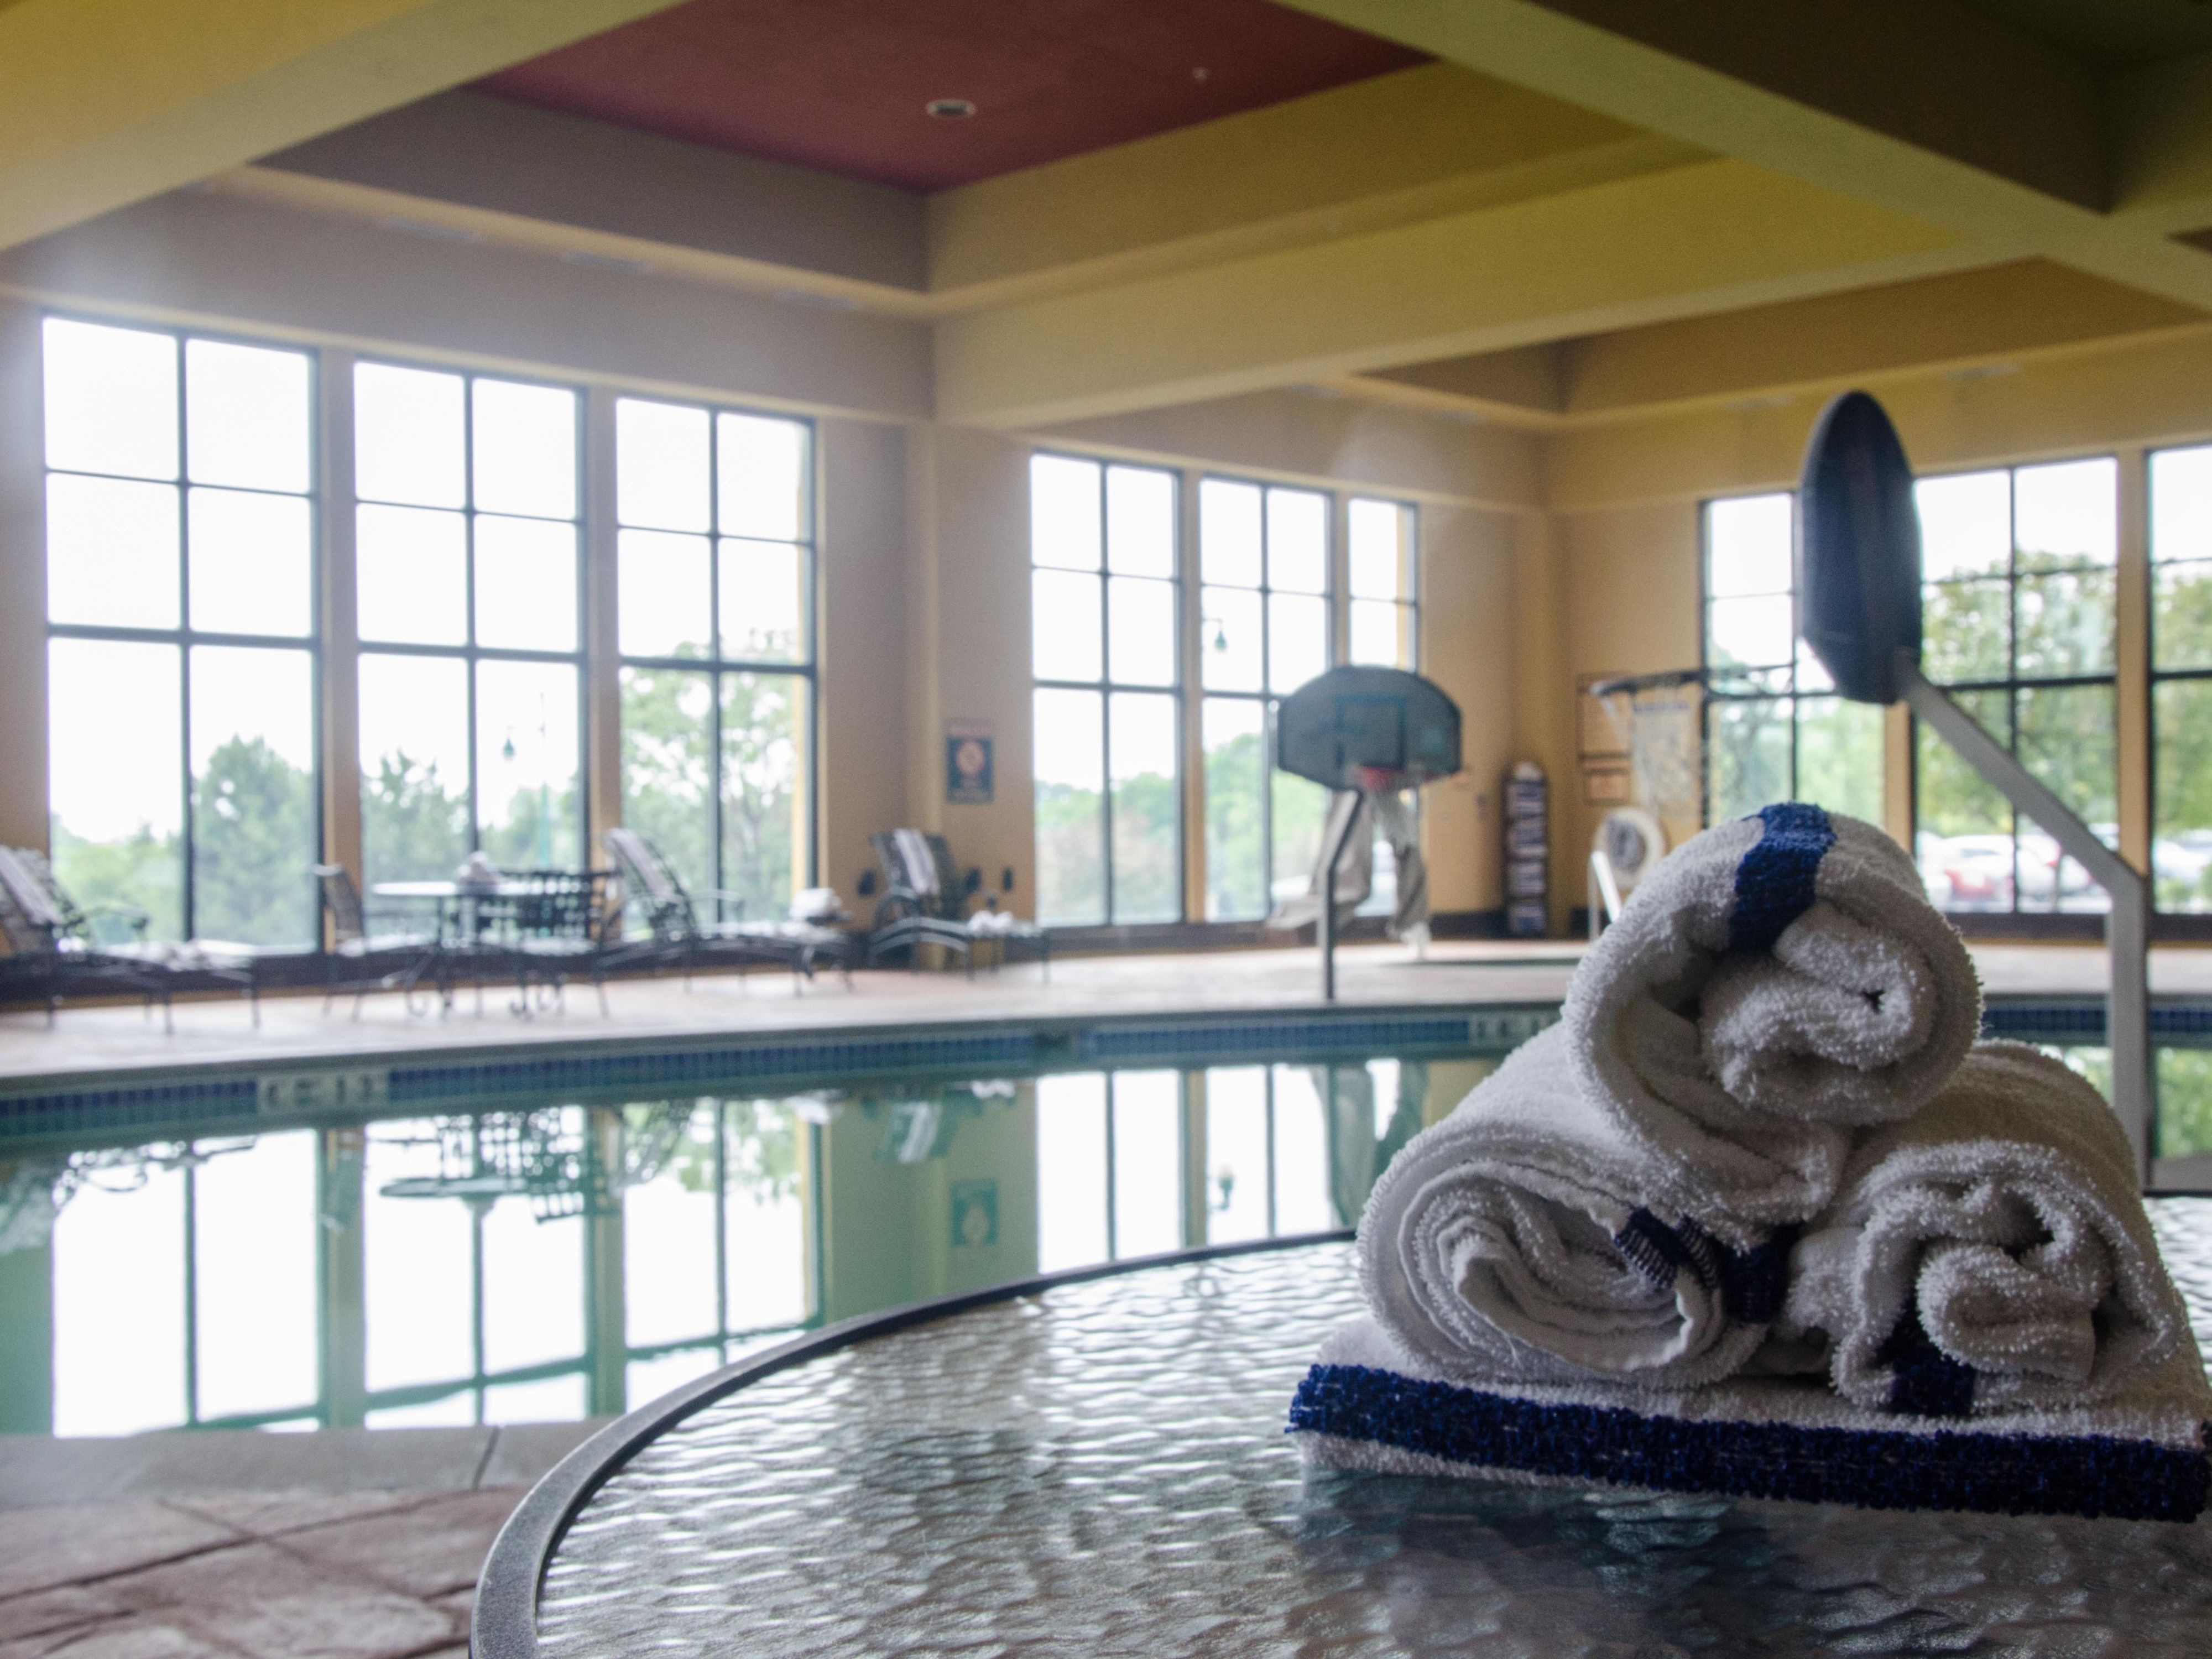 Relax in our indoor pool and hot tub overlooking scenic views of our wildlife and pond year round. Ask us about availability of our Pool Side rooms with a sliding glass door directly onto the pool deck. 